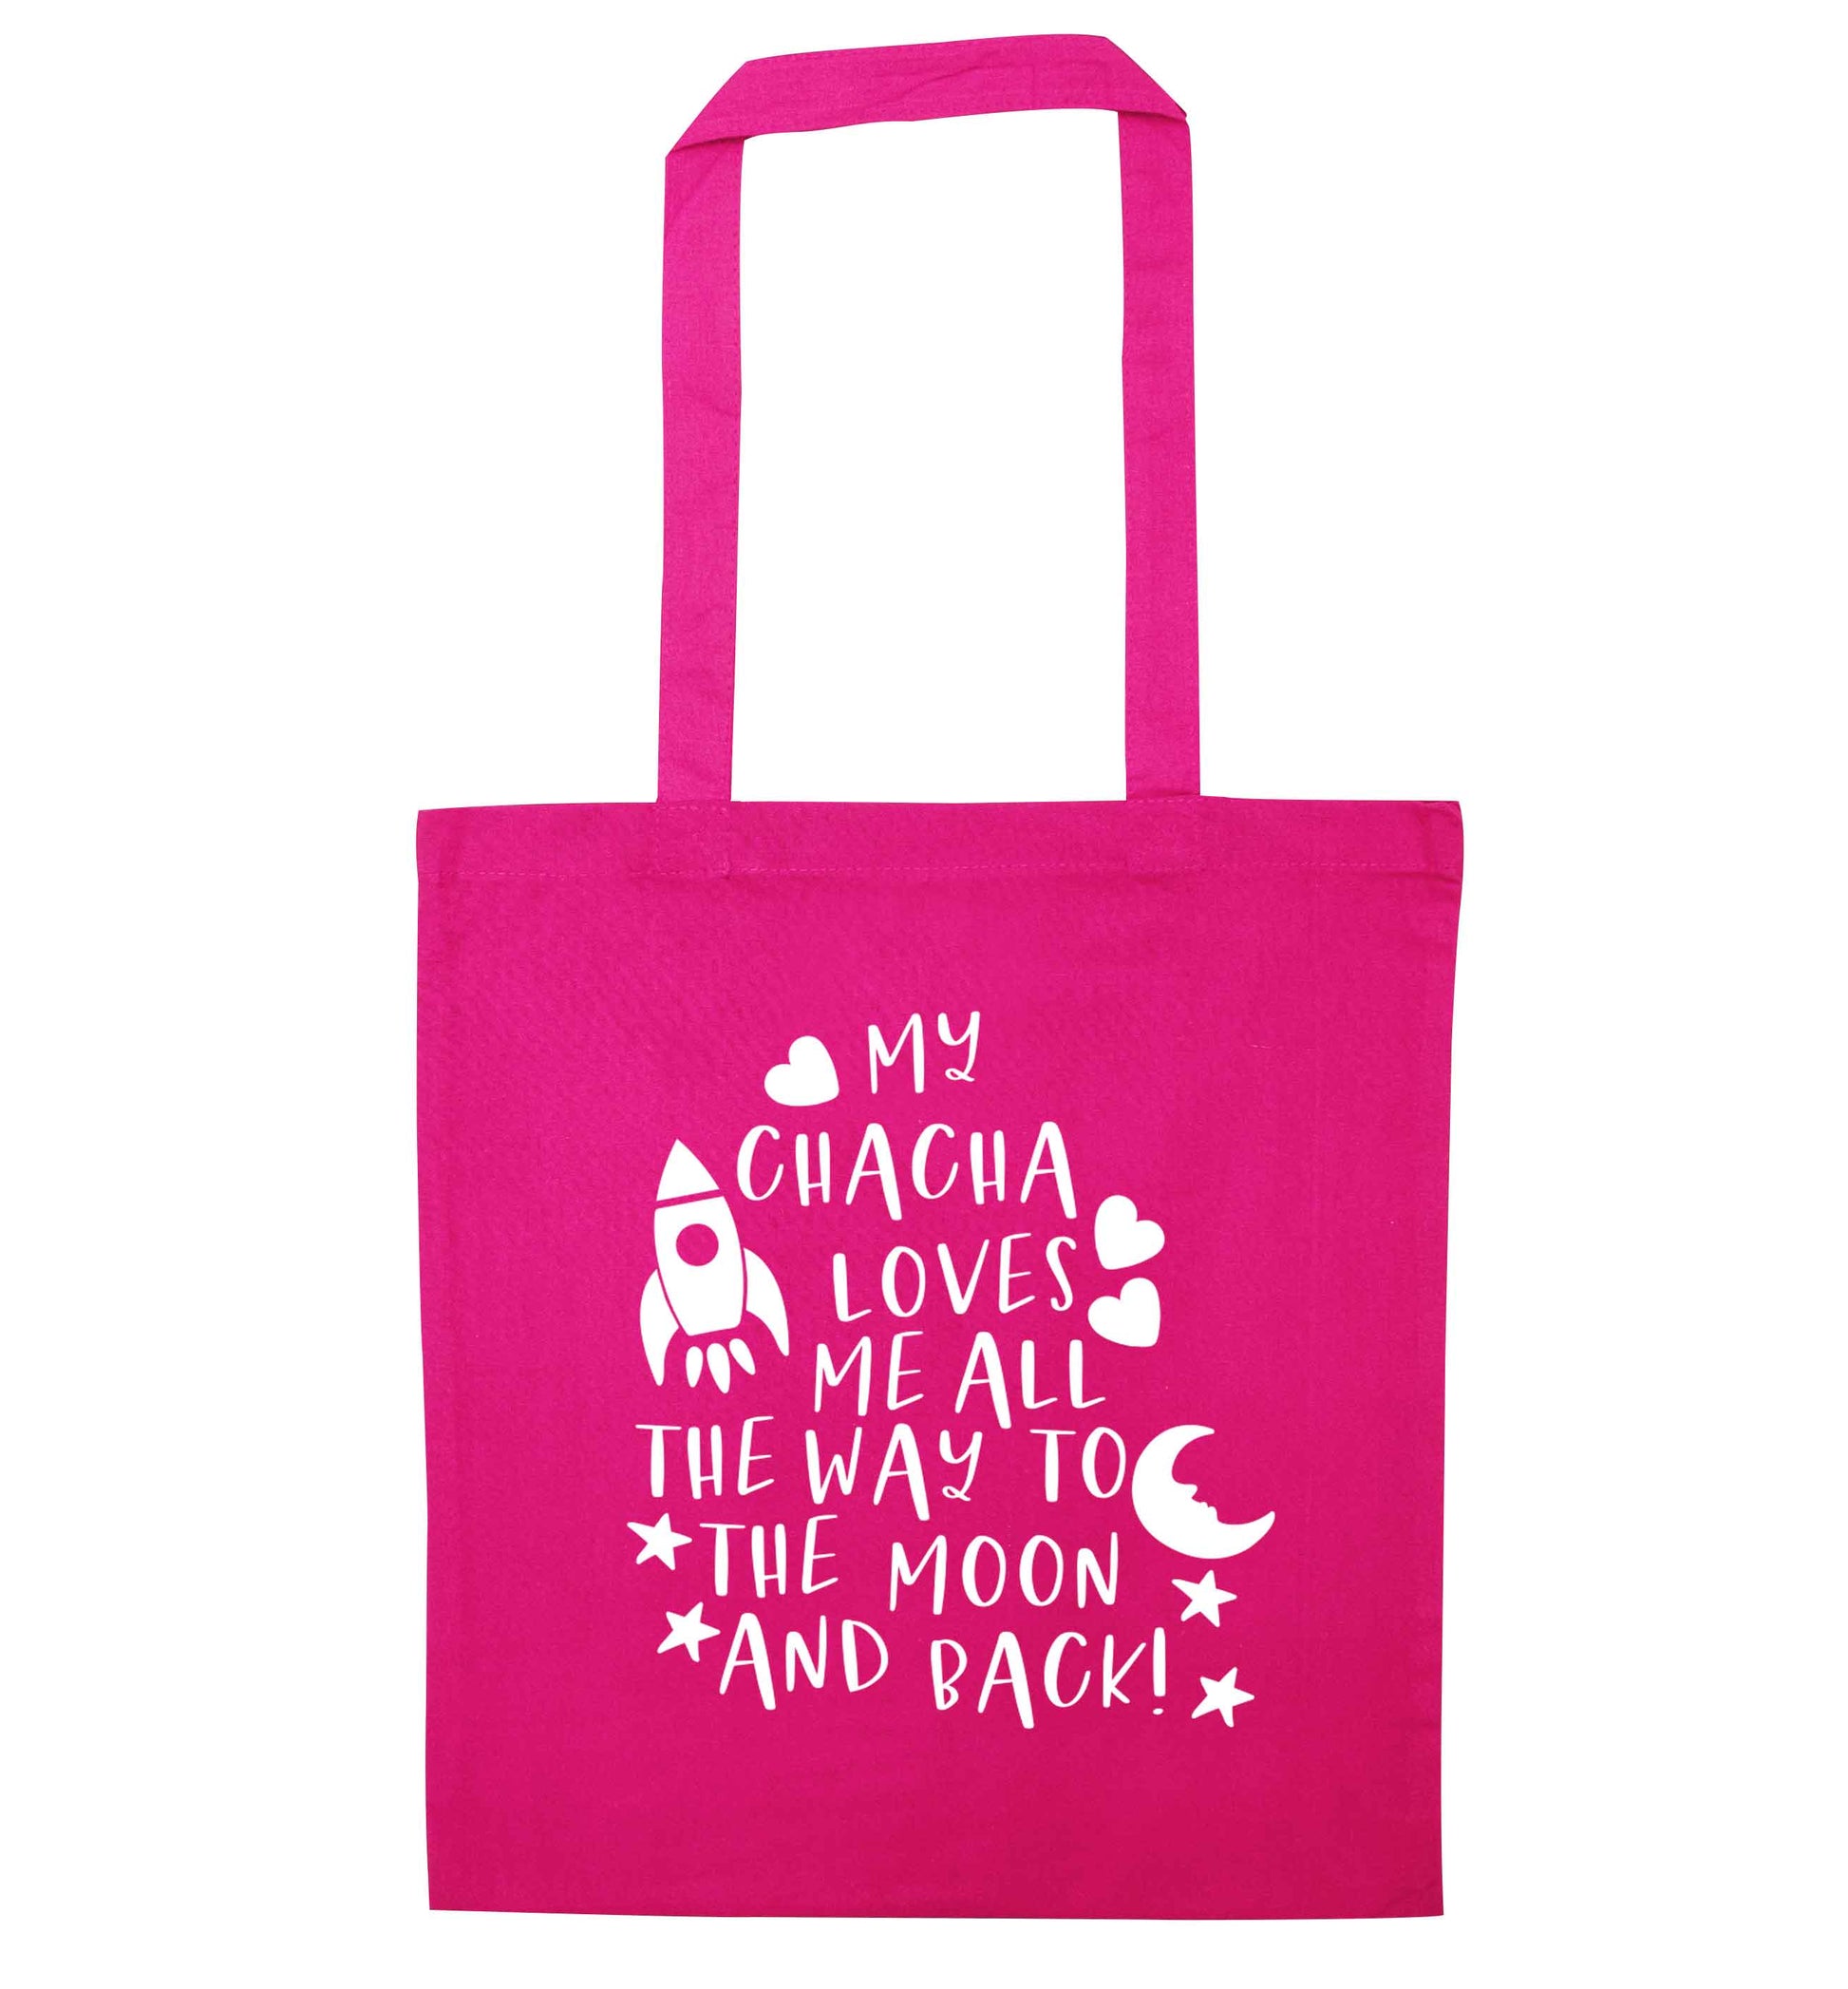 My chacha loves me all the way to the moon and back pink tote bag